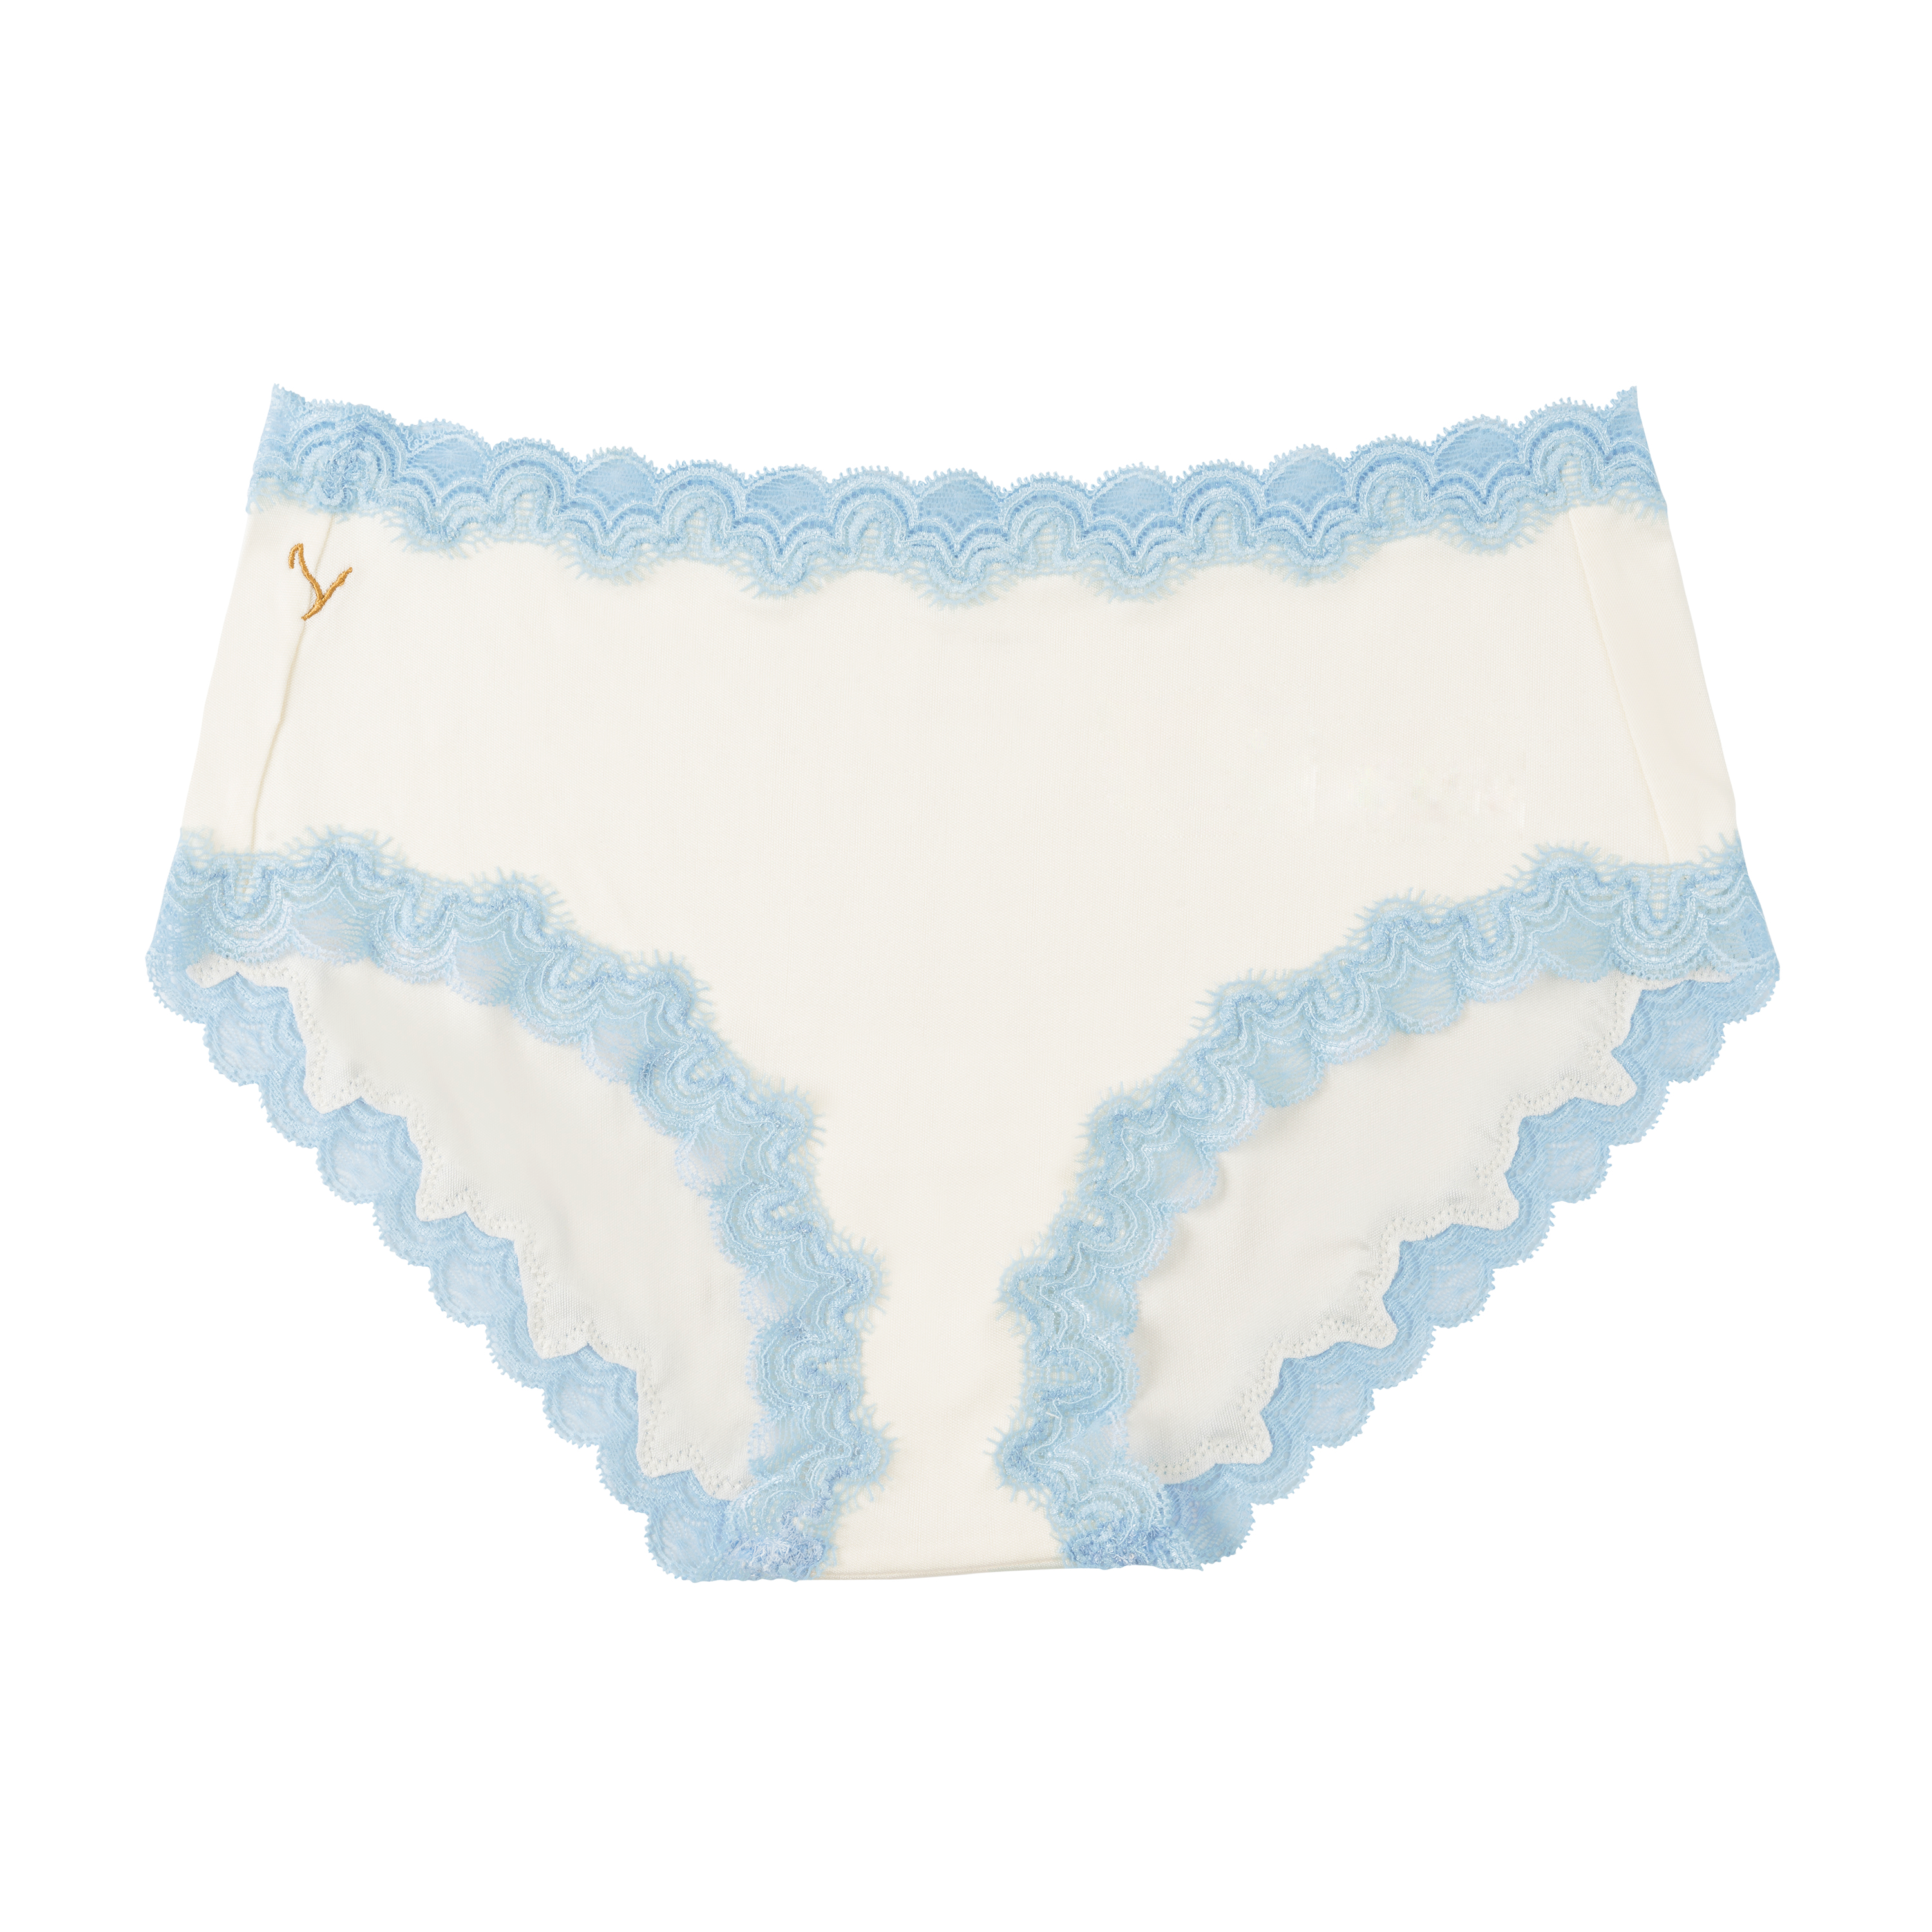 Panties in silk and lace white - Brief in lace and silk - Marianna